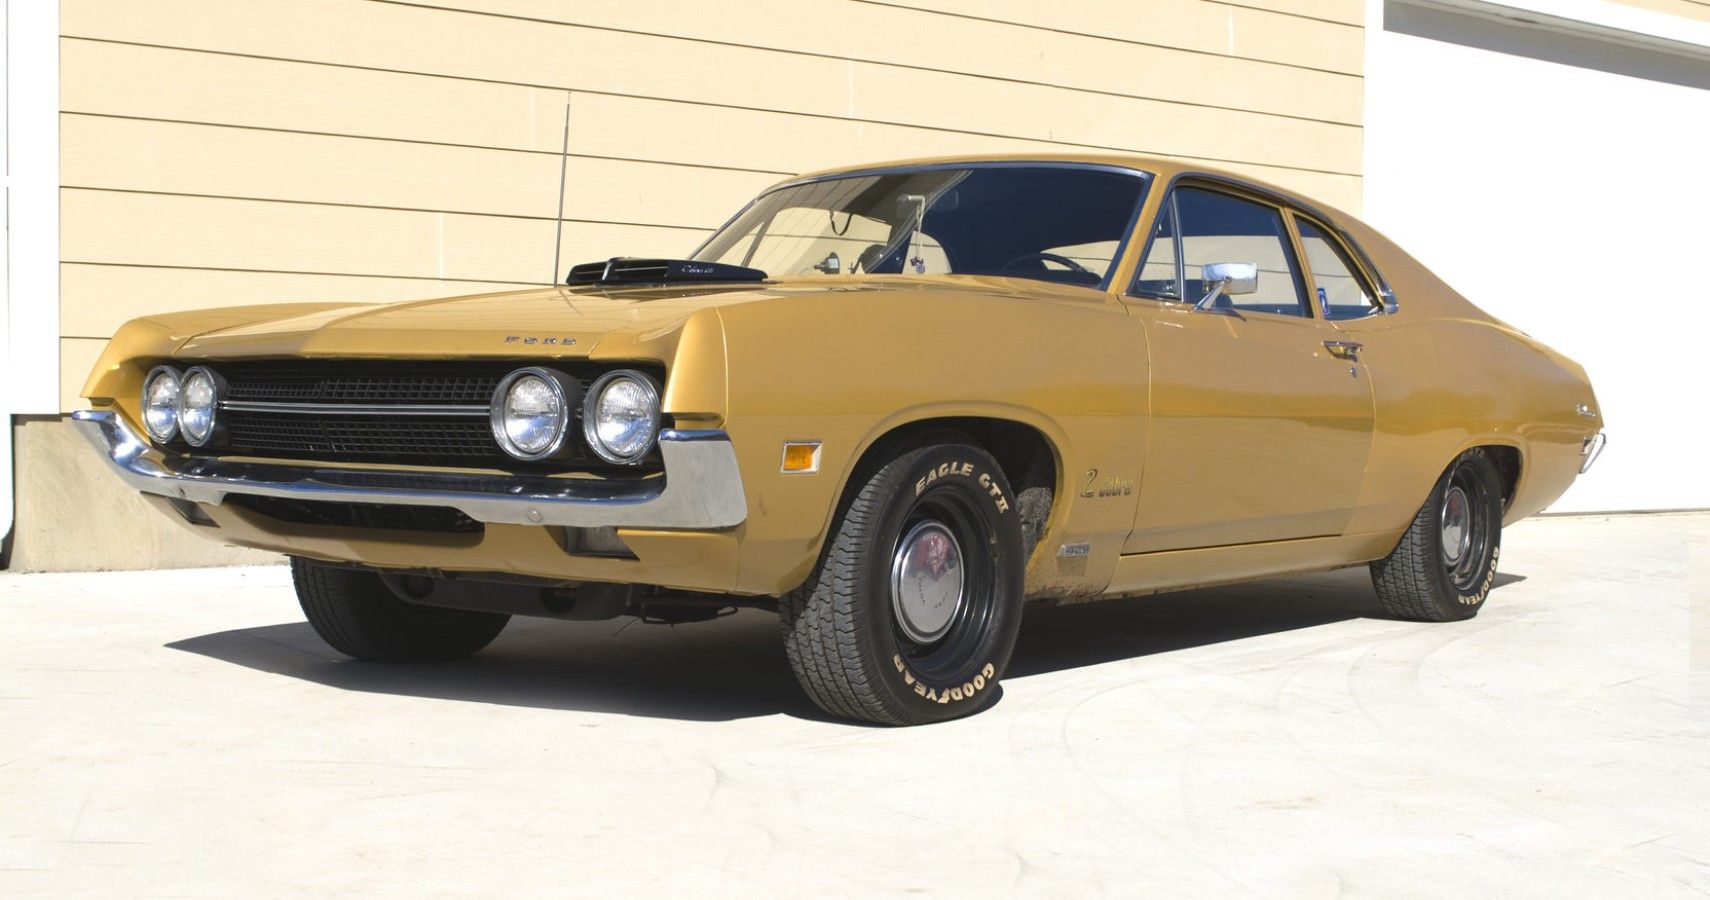  1970 Ford Falcon 429 Cobra Jet in gold front third quarter view